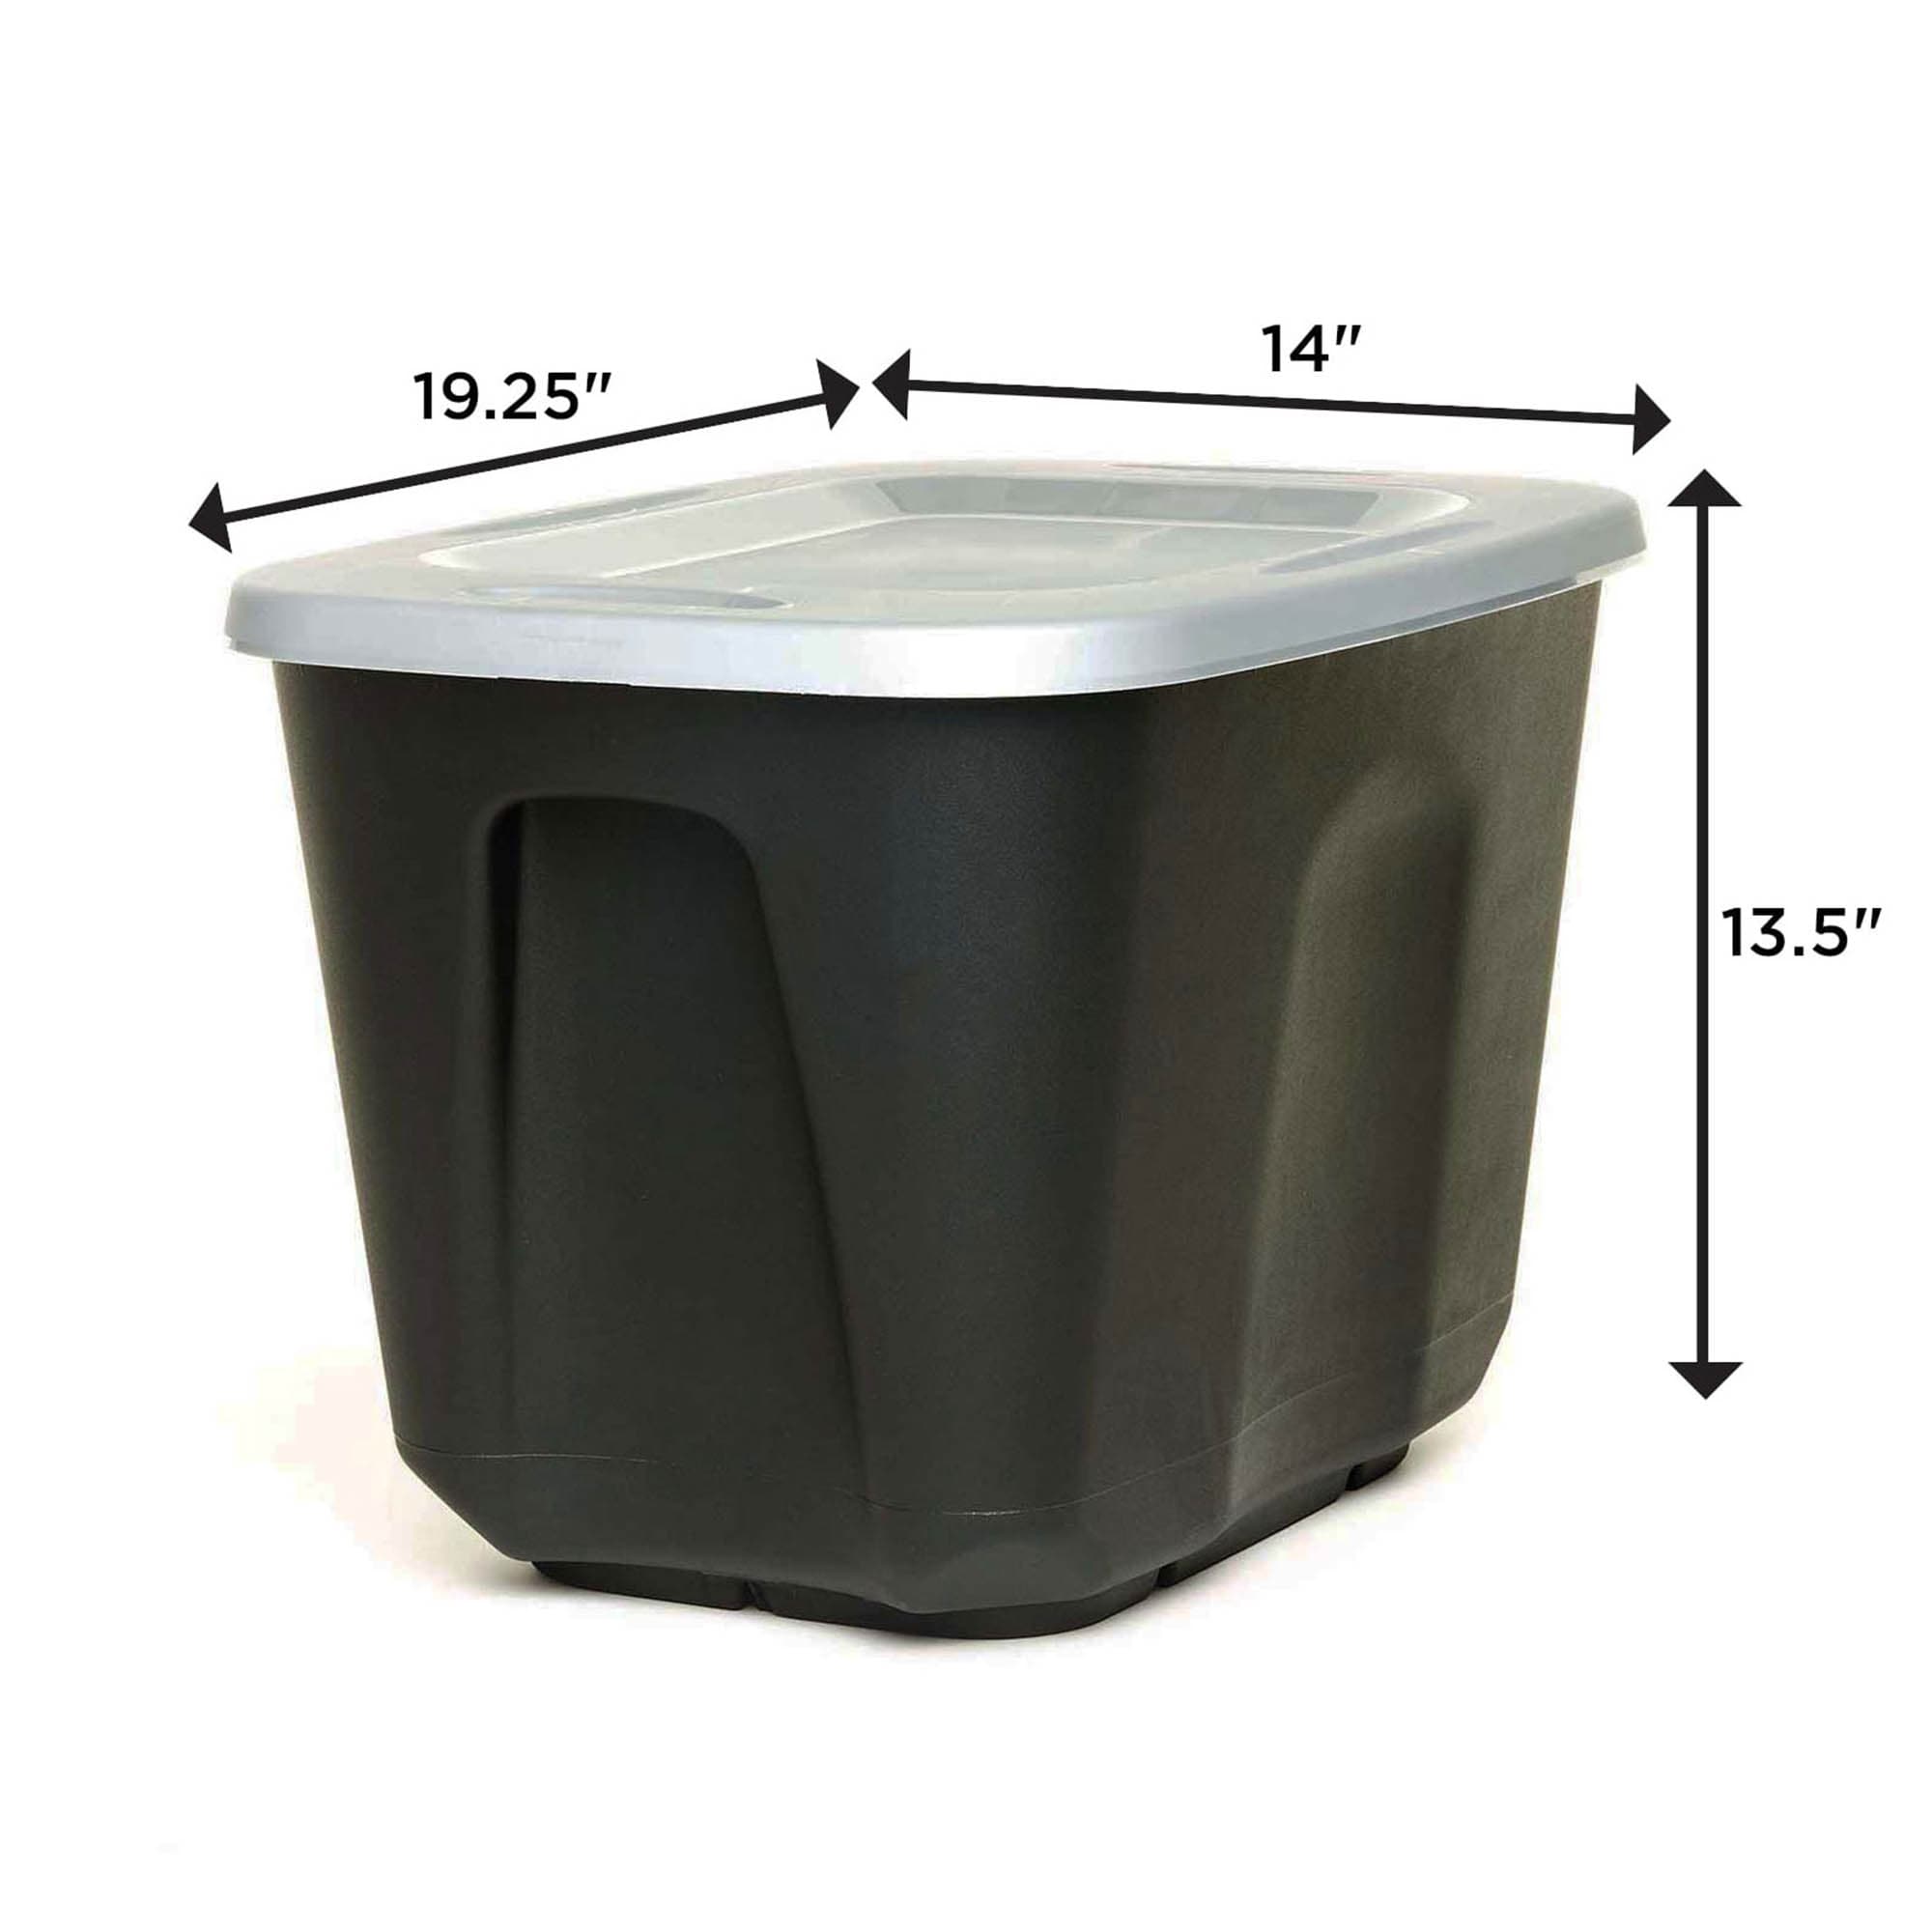 (40-Quart) with Homz 10-Gallons Snap Lid at Large Standard Tote Products Black